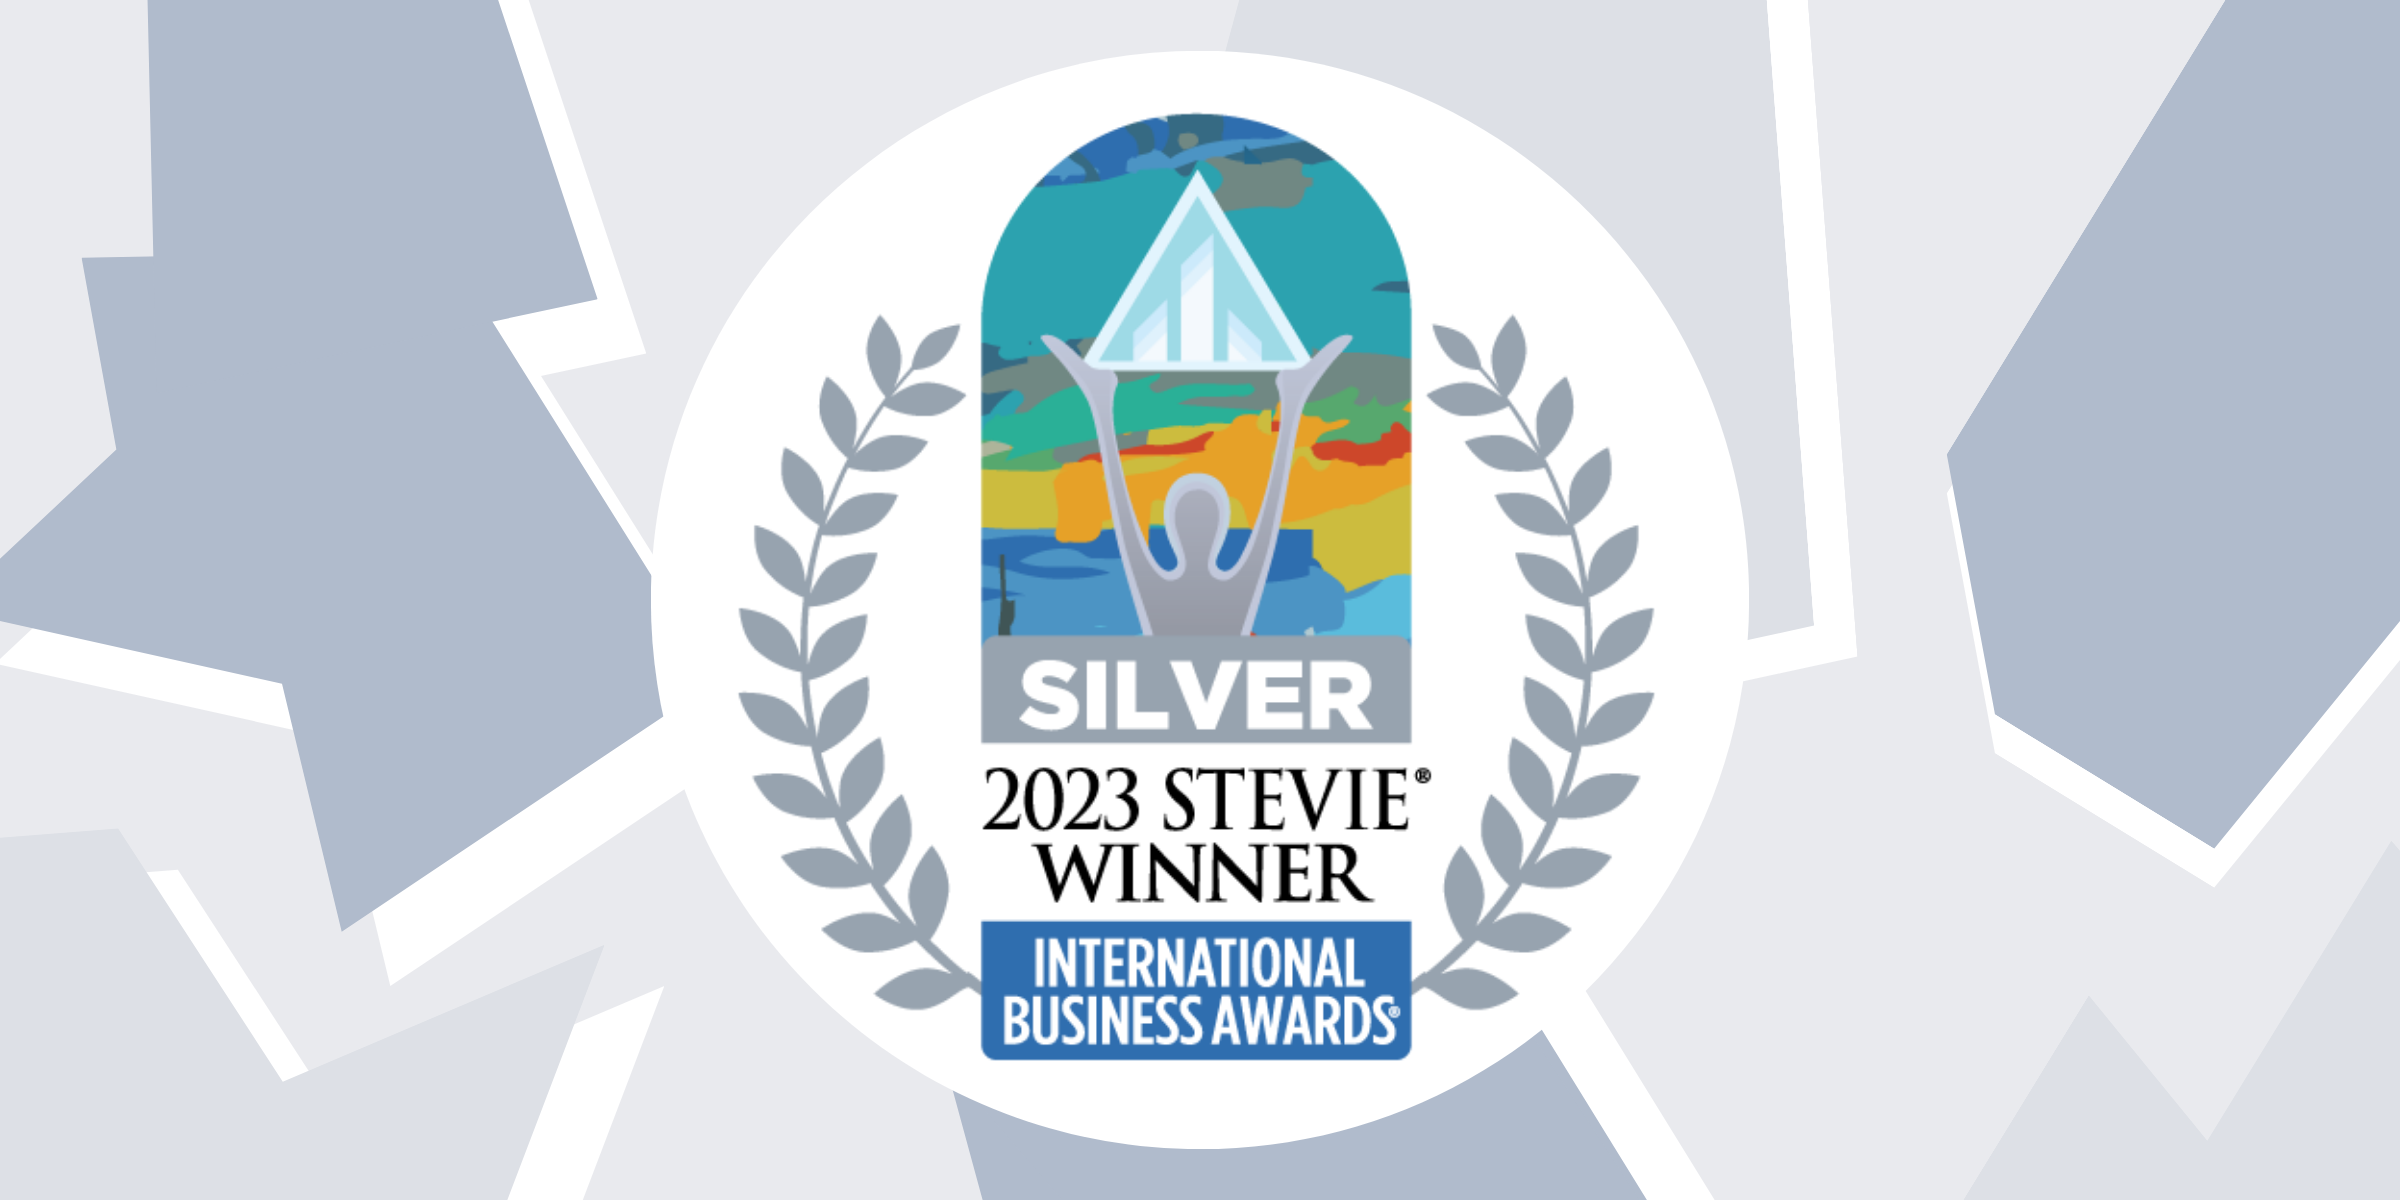 TimeXtender Wins Silver Stevie® Award 2023 for Best ERP Solution in the Business Technology Solution Category